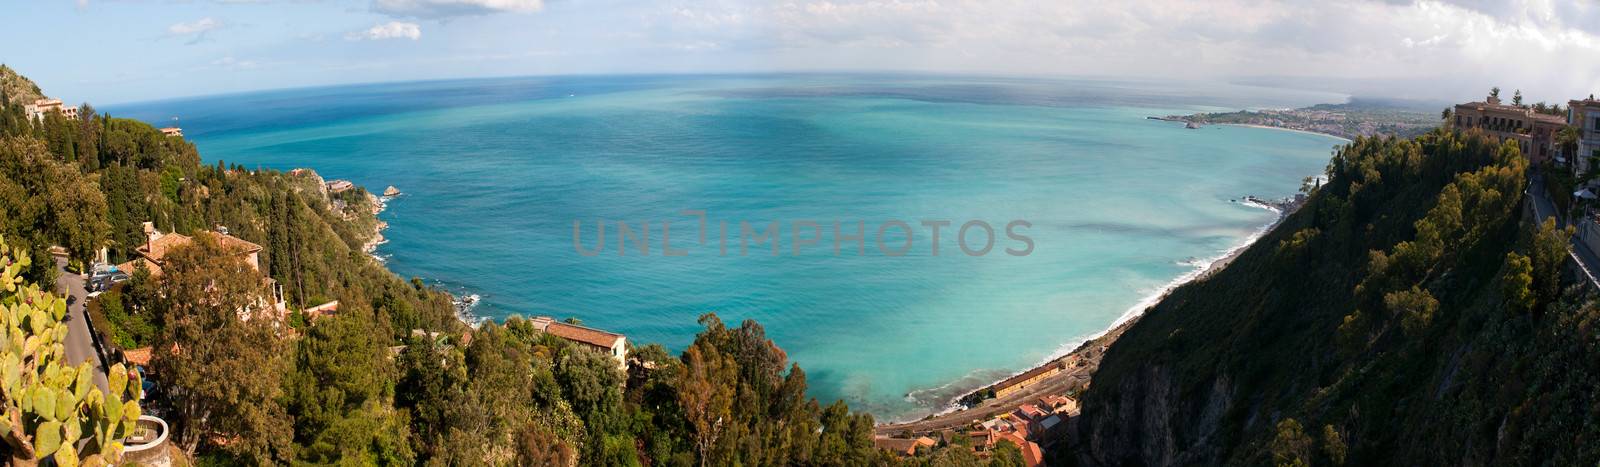 Beautiful coast of Sicily. Panoramic View from Taormina, famous tourist resort, the most luxury town on Sicilian coastline, Sicily, Italy by lexan